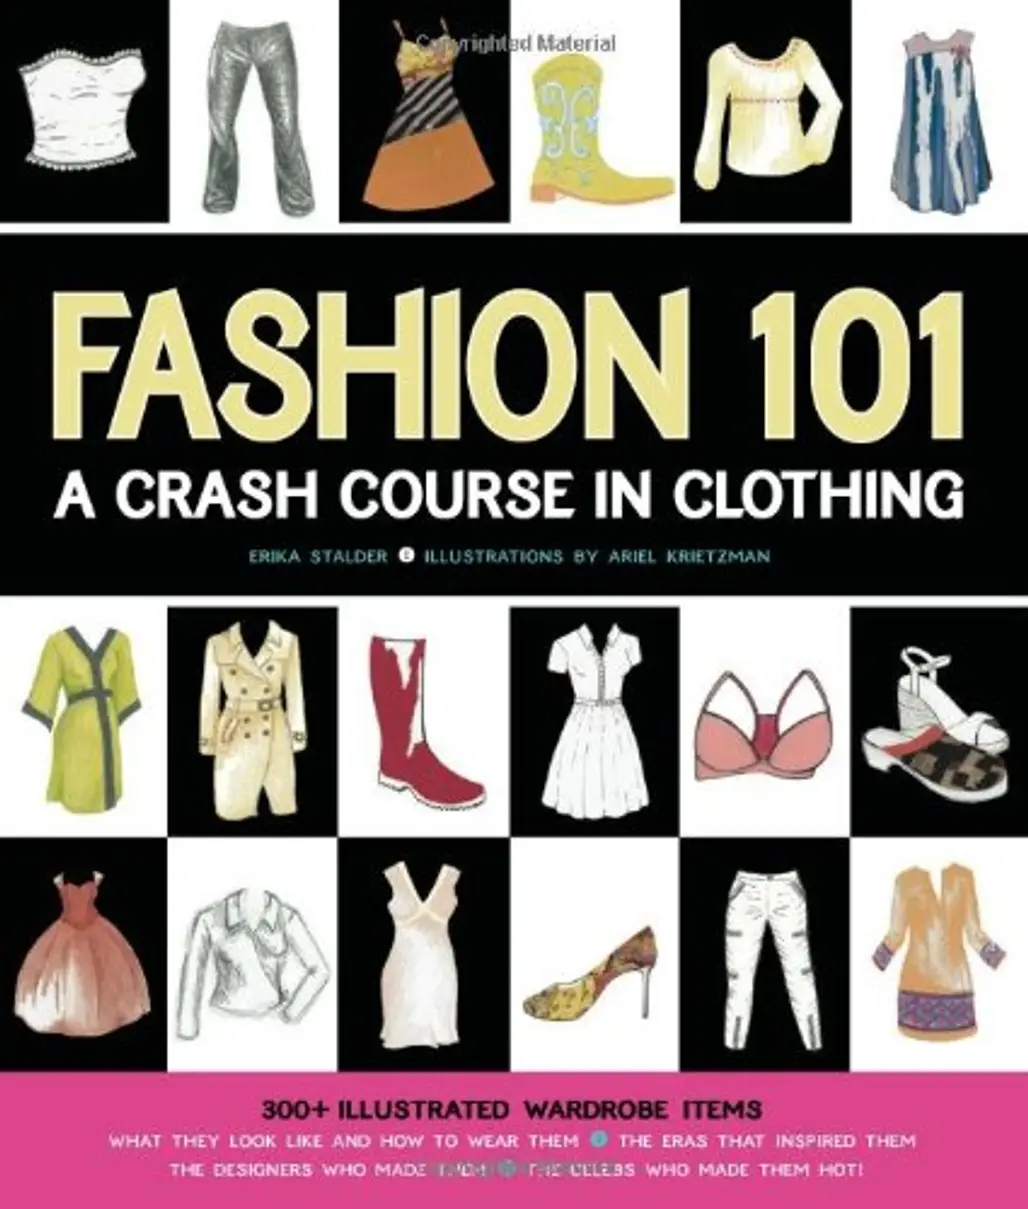 Fashion 101: a Crash Course in Clothing by Erika Stalder